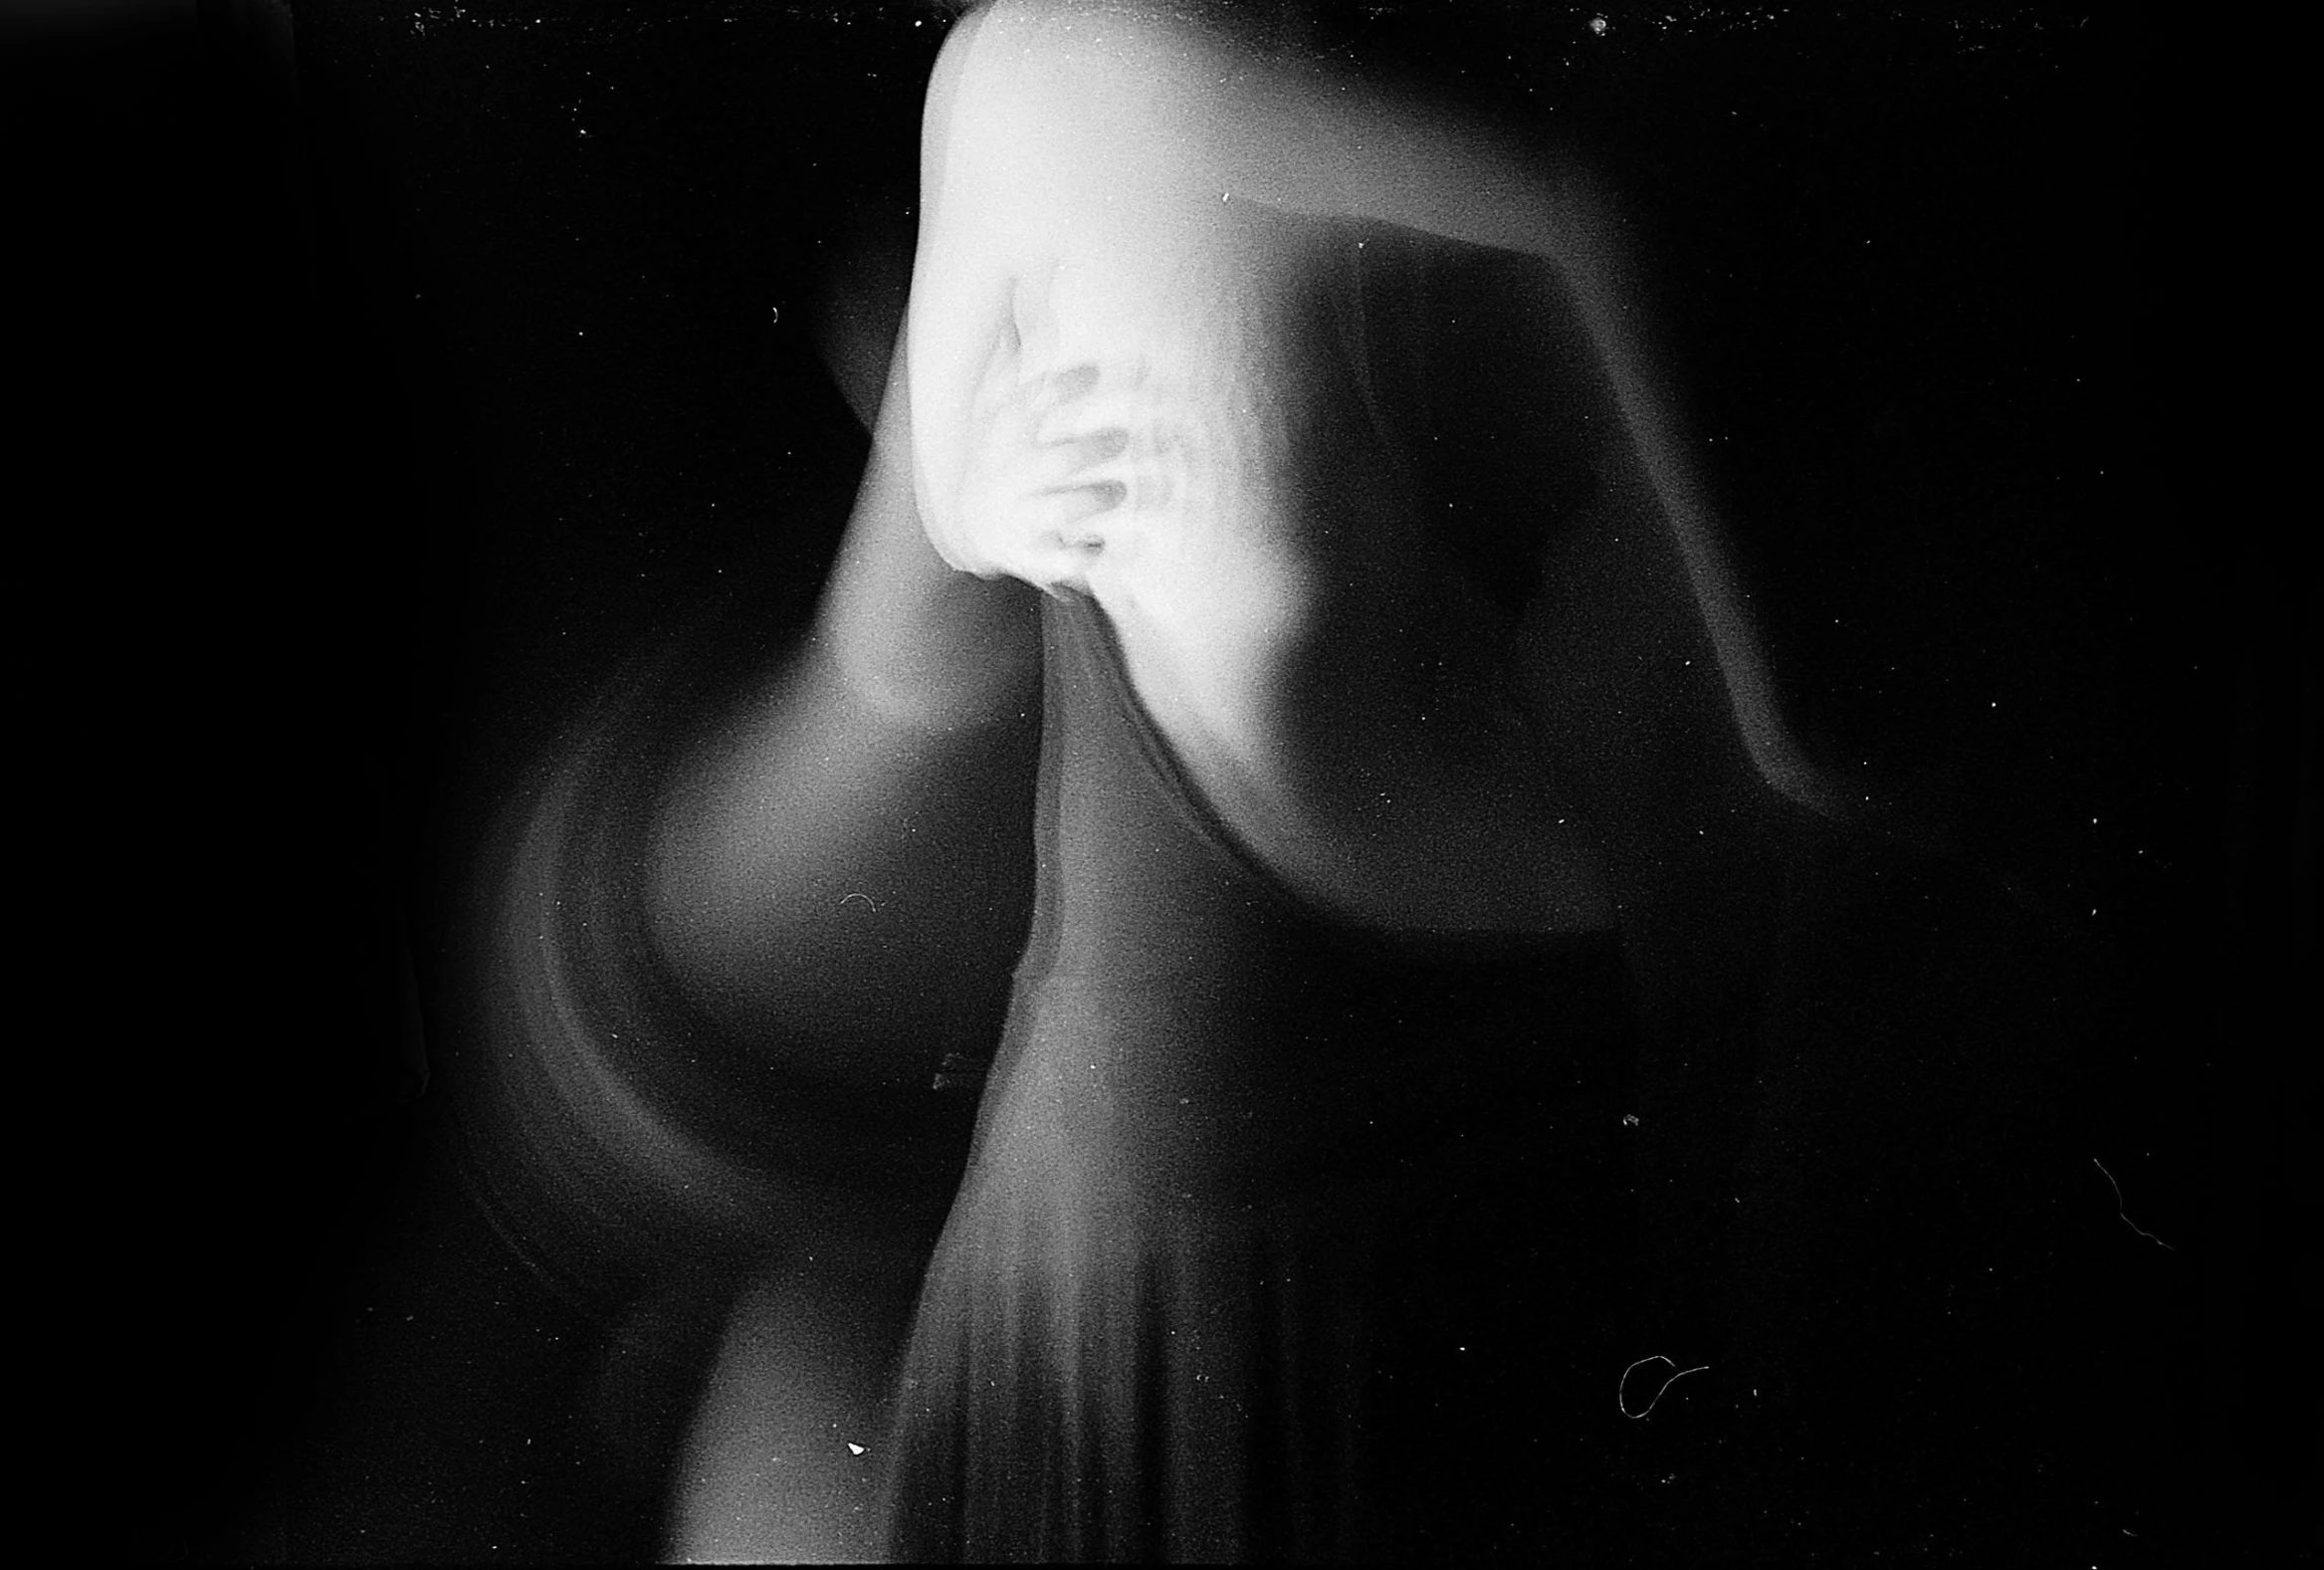 a black and white photo of a woman in a dress, inspired by Katia Chausheva, tumblr, conceptual art, night. by greg rutkowski, curved body, loving embrace, abstract figurative art